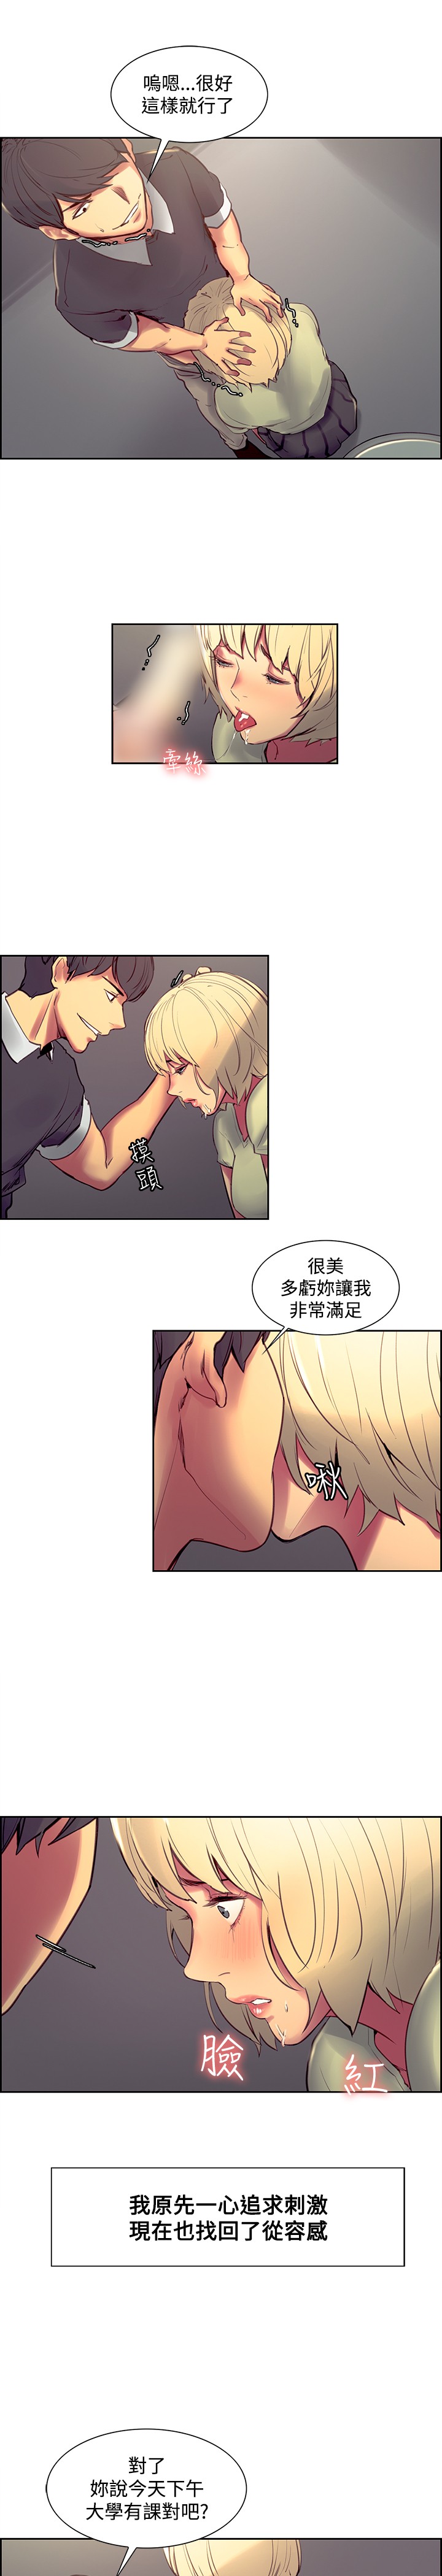 [Serious] Domesticate the Housekeeper 调教家政妇 ch.29-33 [Chinese] page 25 full